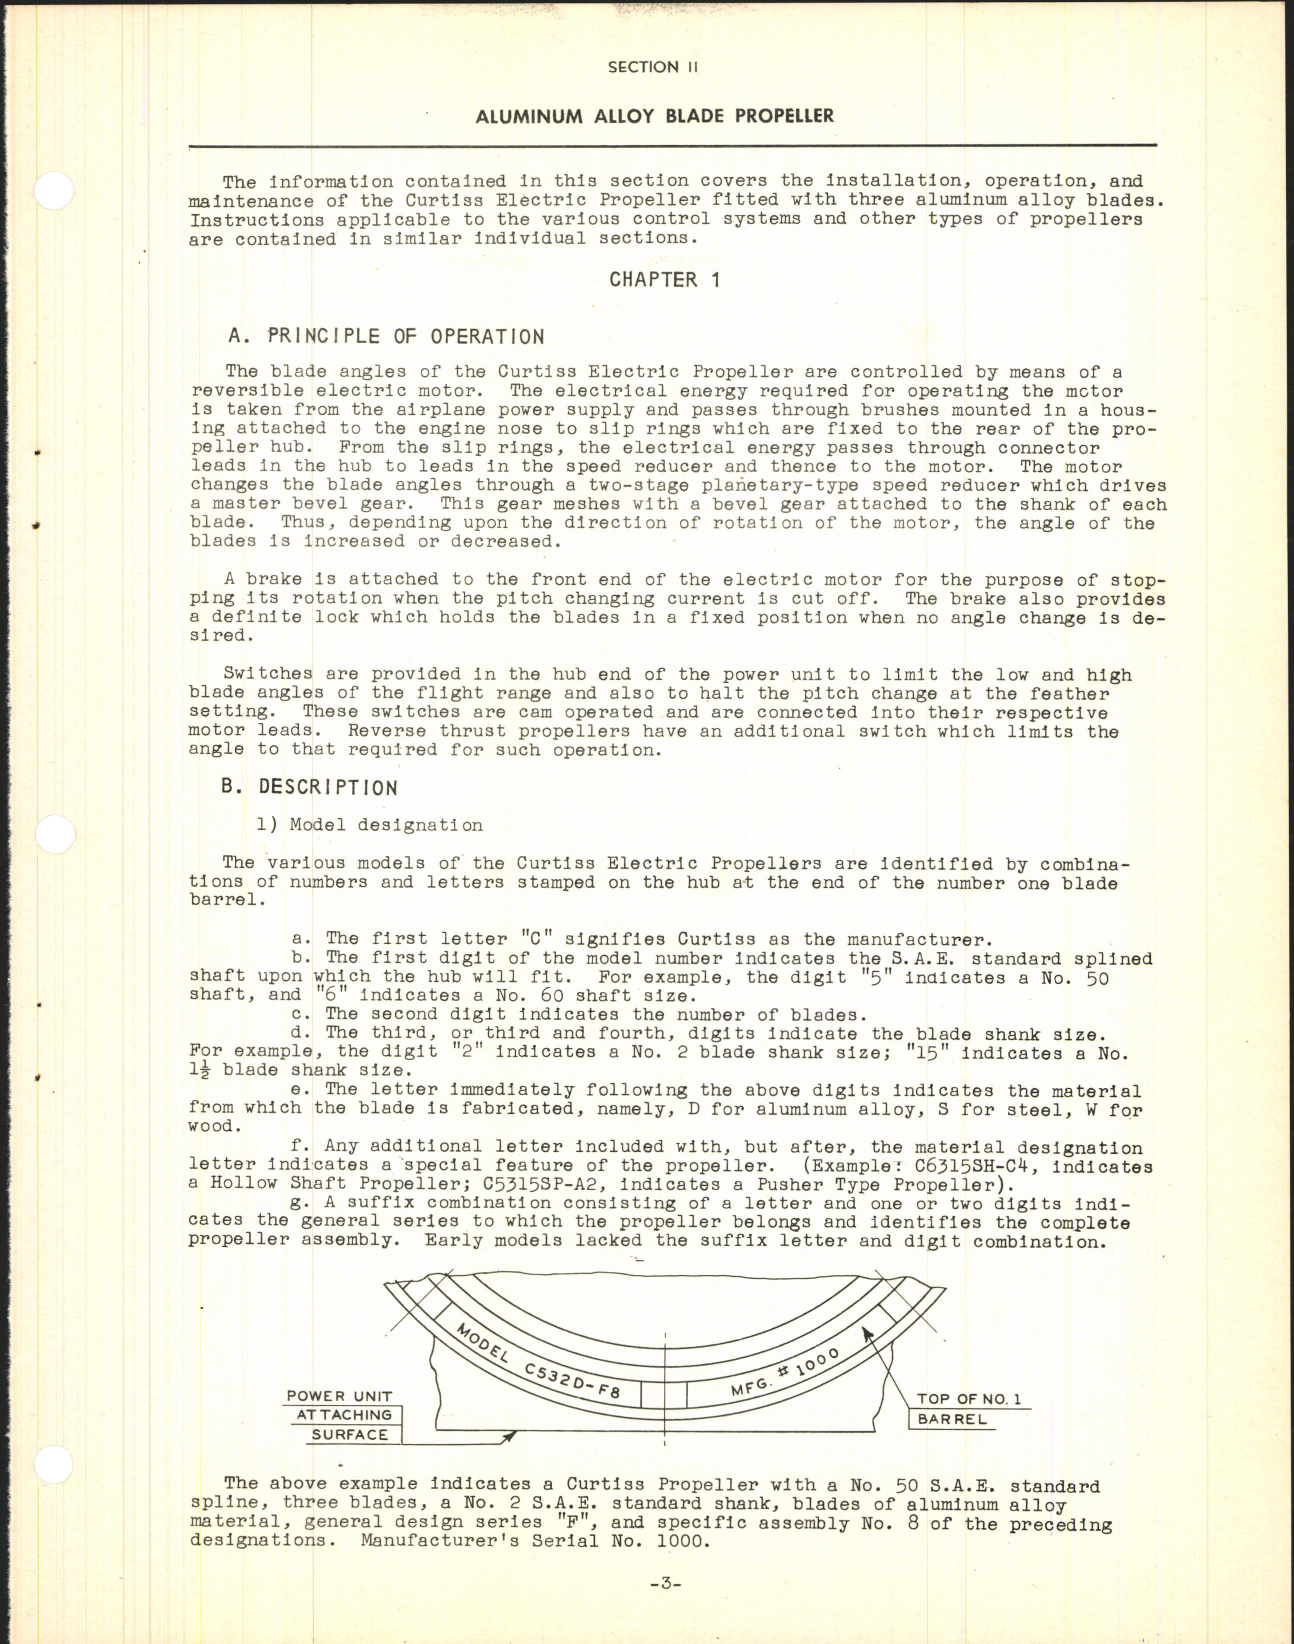 Sample page 5 from AirCorps Library document: Section 11 - Aluminum Alloy Blade Propeller (Three Blade)